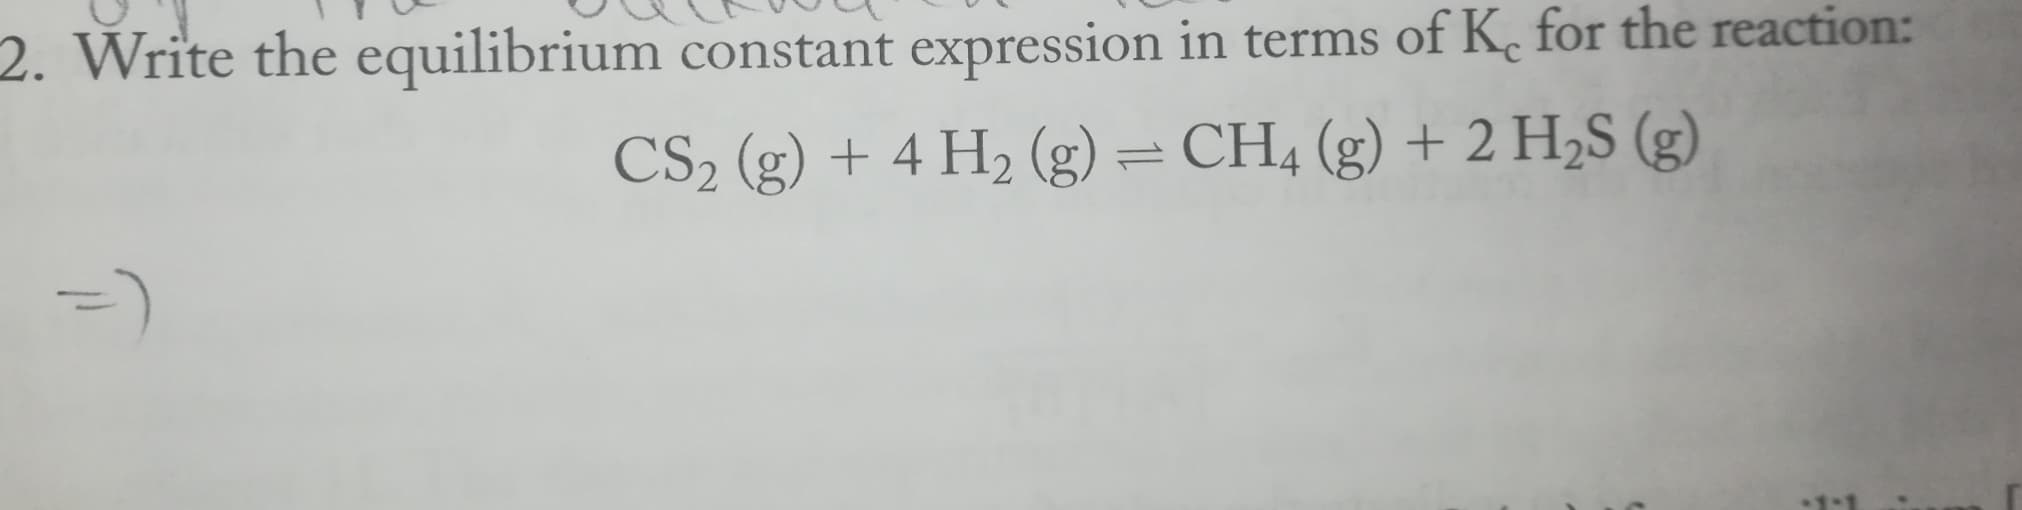 2. Write the equilibrium constant expression in terms of K. for the reaction:
CS2 (g) + 4 H2 (g) = CH4 (g) + 2 H2S (g)
=)
